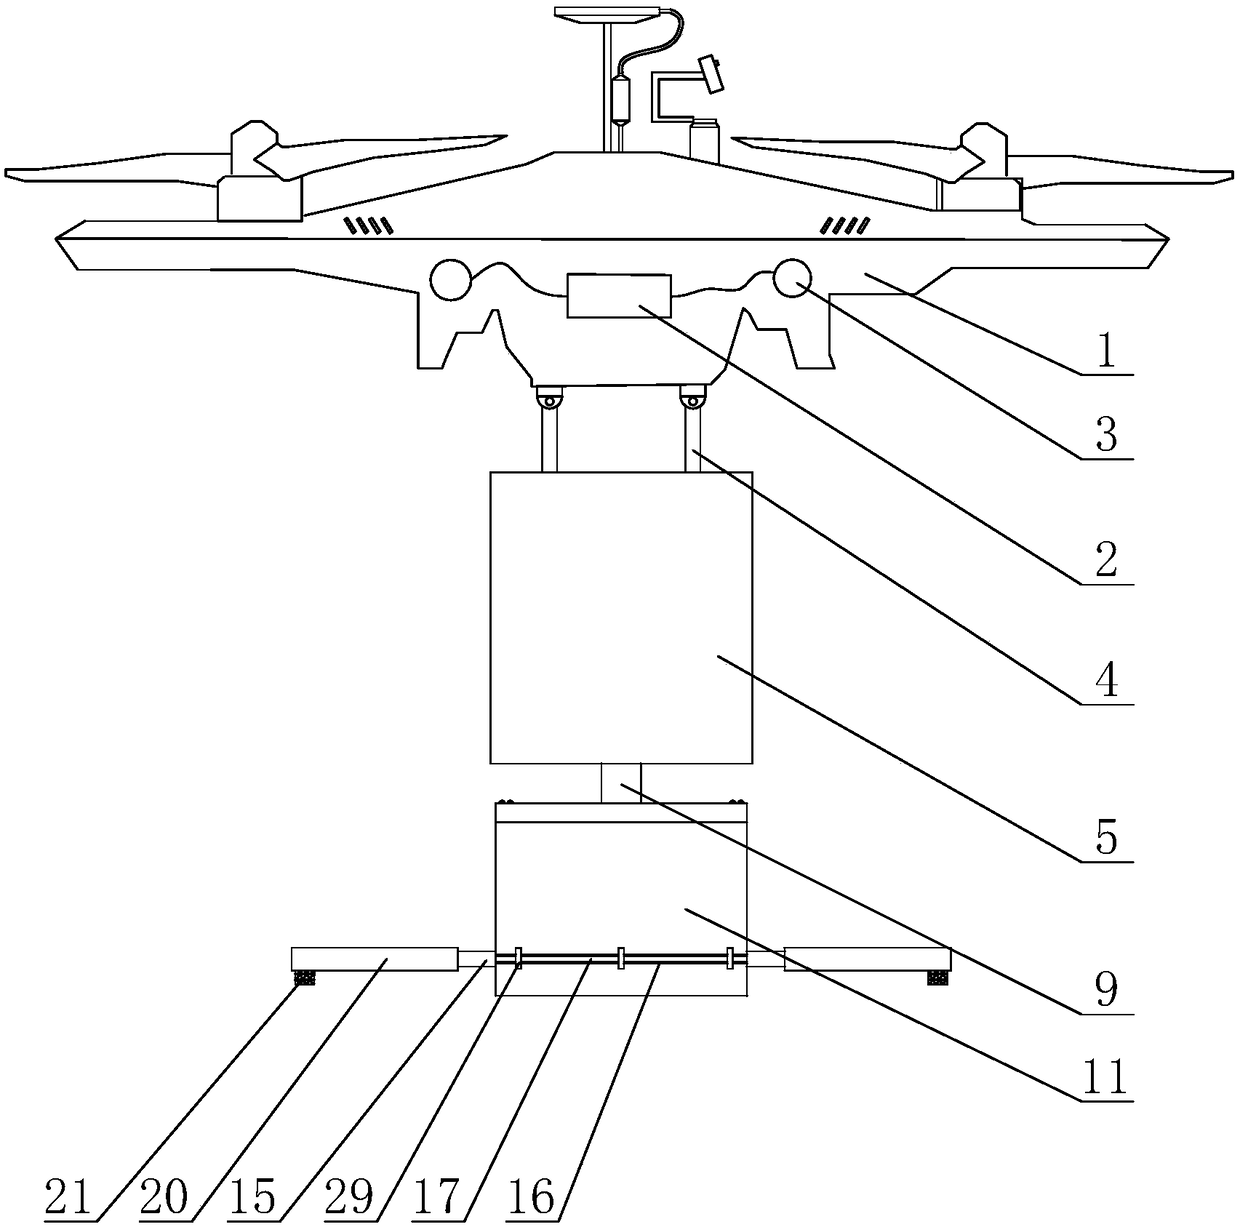 Unmanned aerial vehicle emergency safety landing device for bridge detection